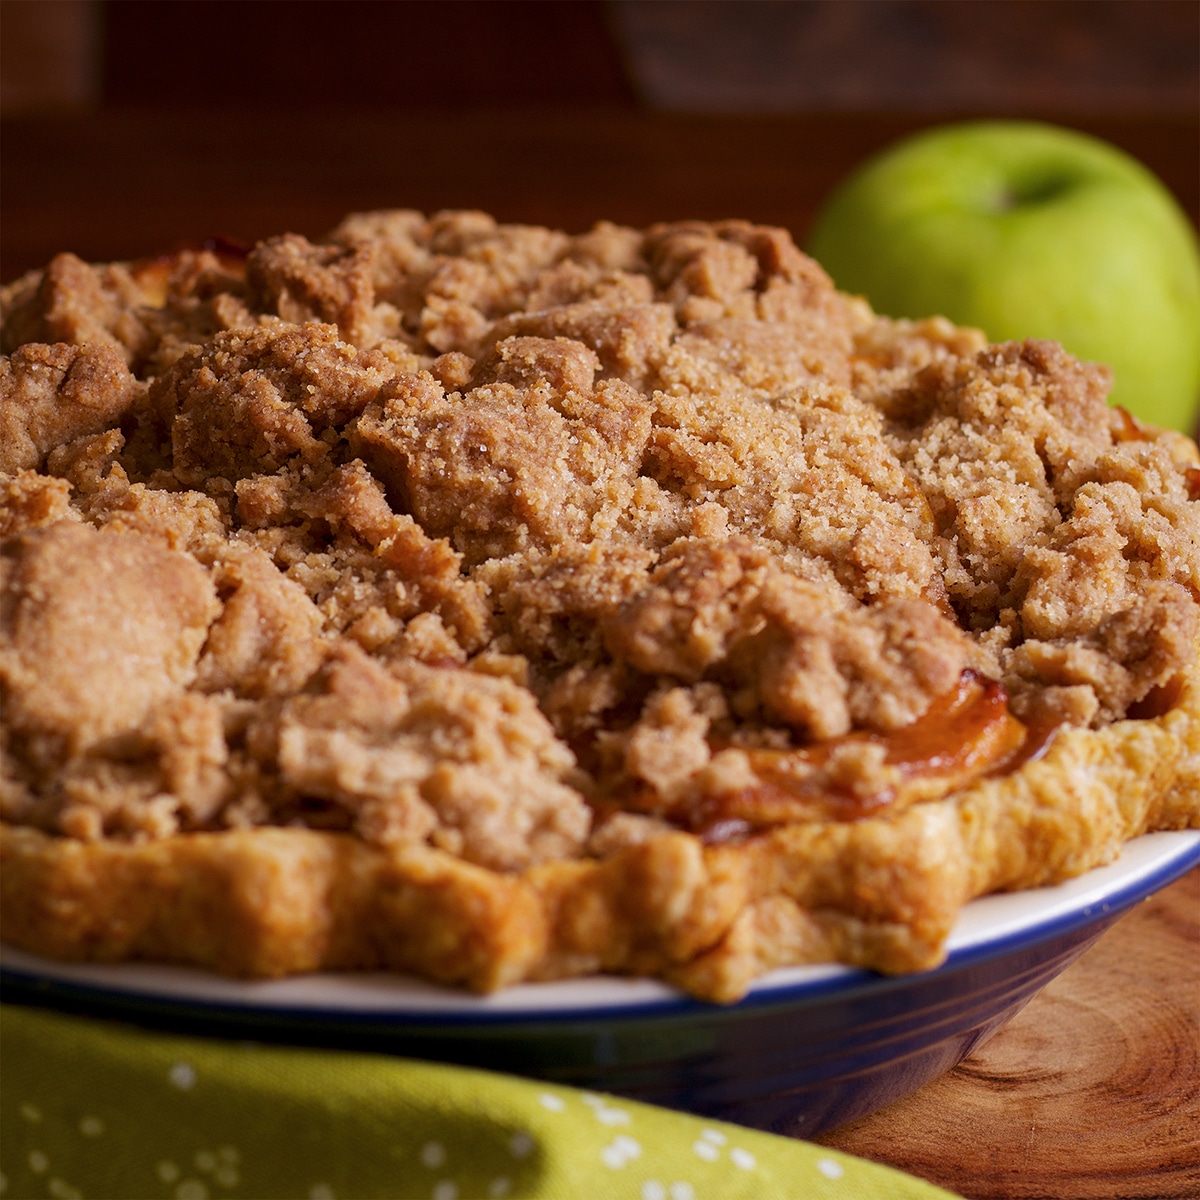 A freshly baked caramel apple pie with a crumb topping resting on a wood cutting board.